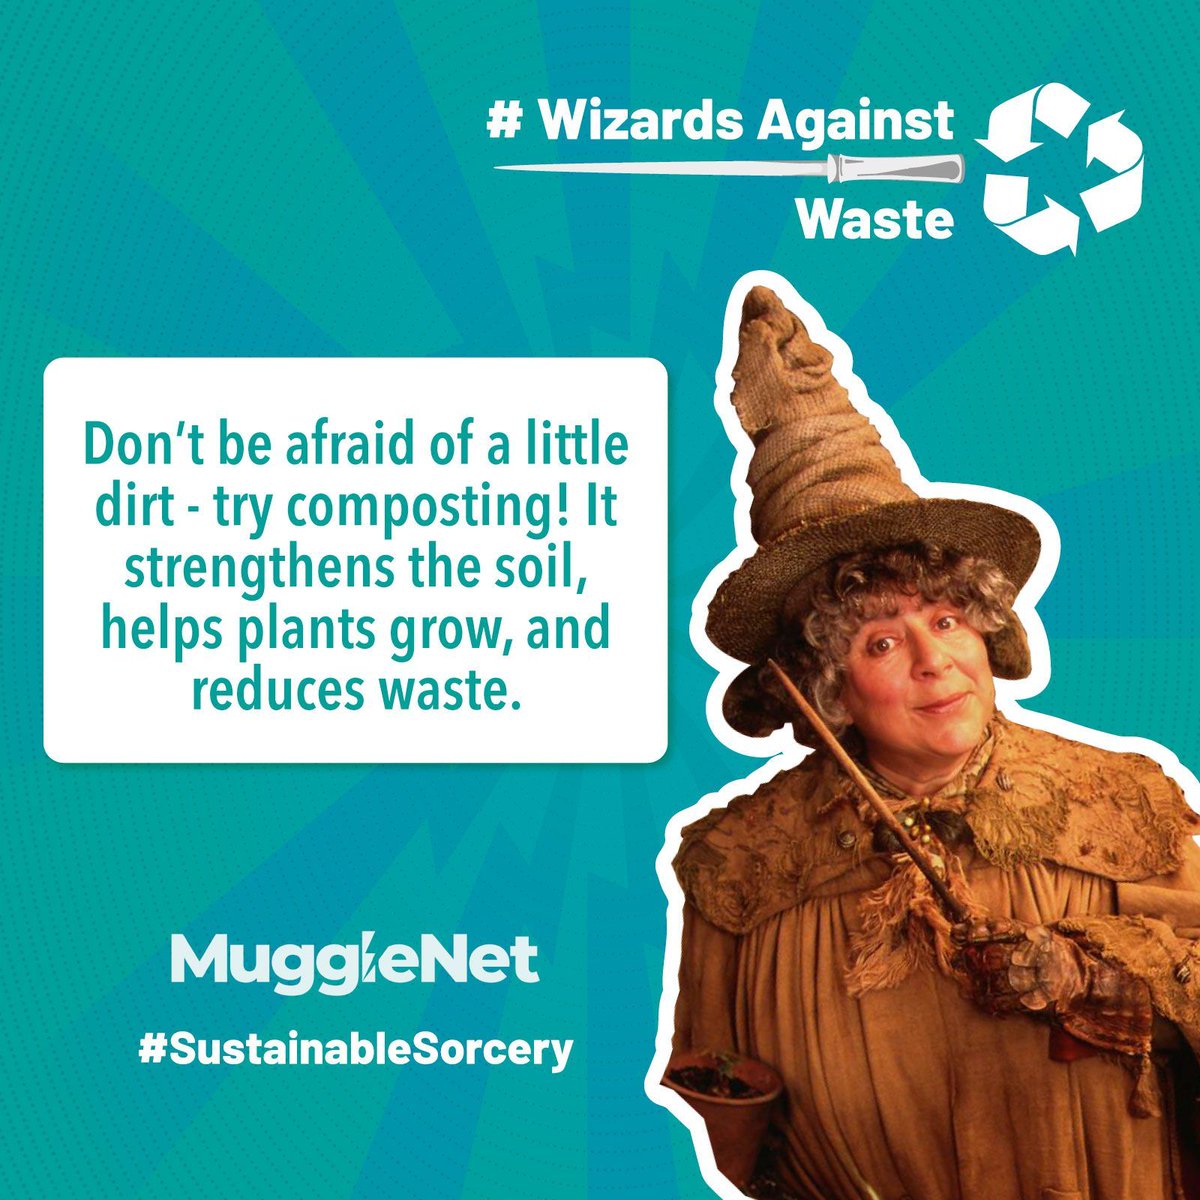 Let's cultivate a greener magic with every spell we sow! 🌱✨Pomona Sprout's sage advice blooms true! 🌻♻️ Don't fear the dirt; let's embrace the magic of sustainability! #WizardsAgainstWaste #SustainableSorcery